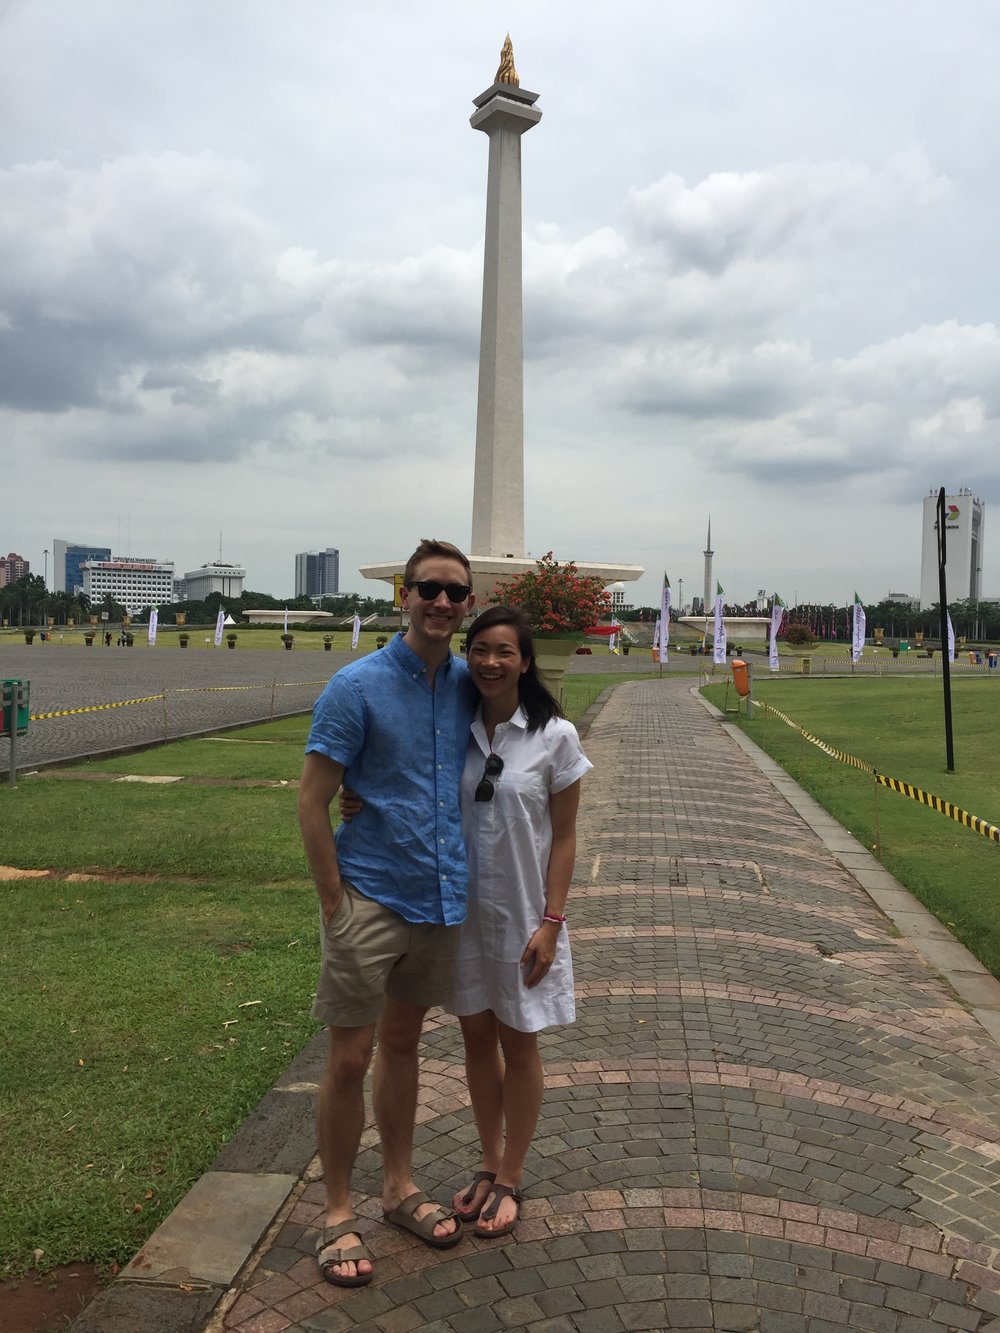 At the Indonesian National Monument